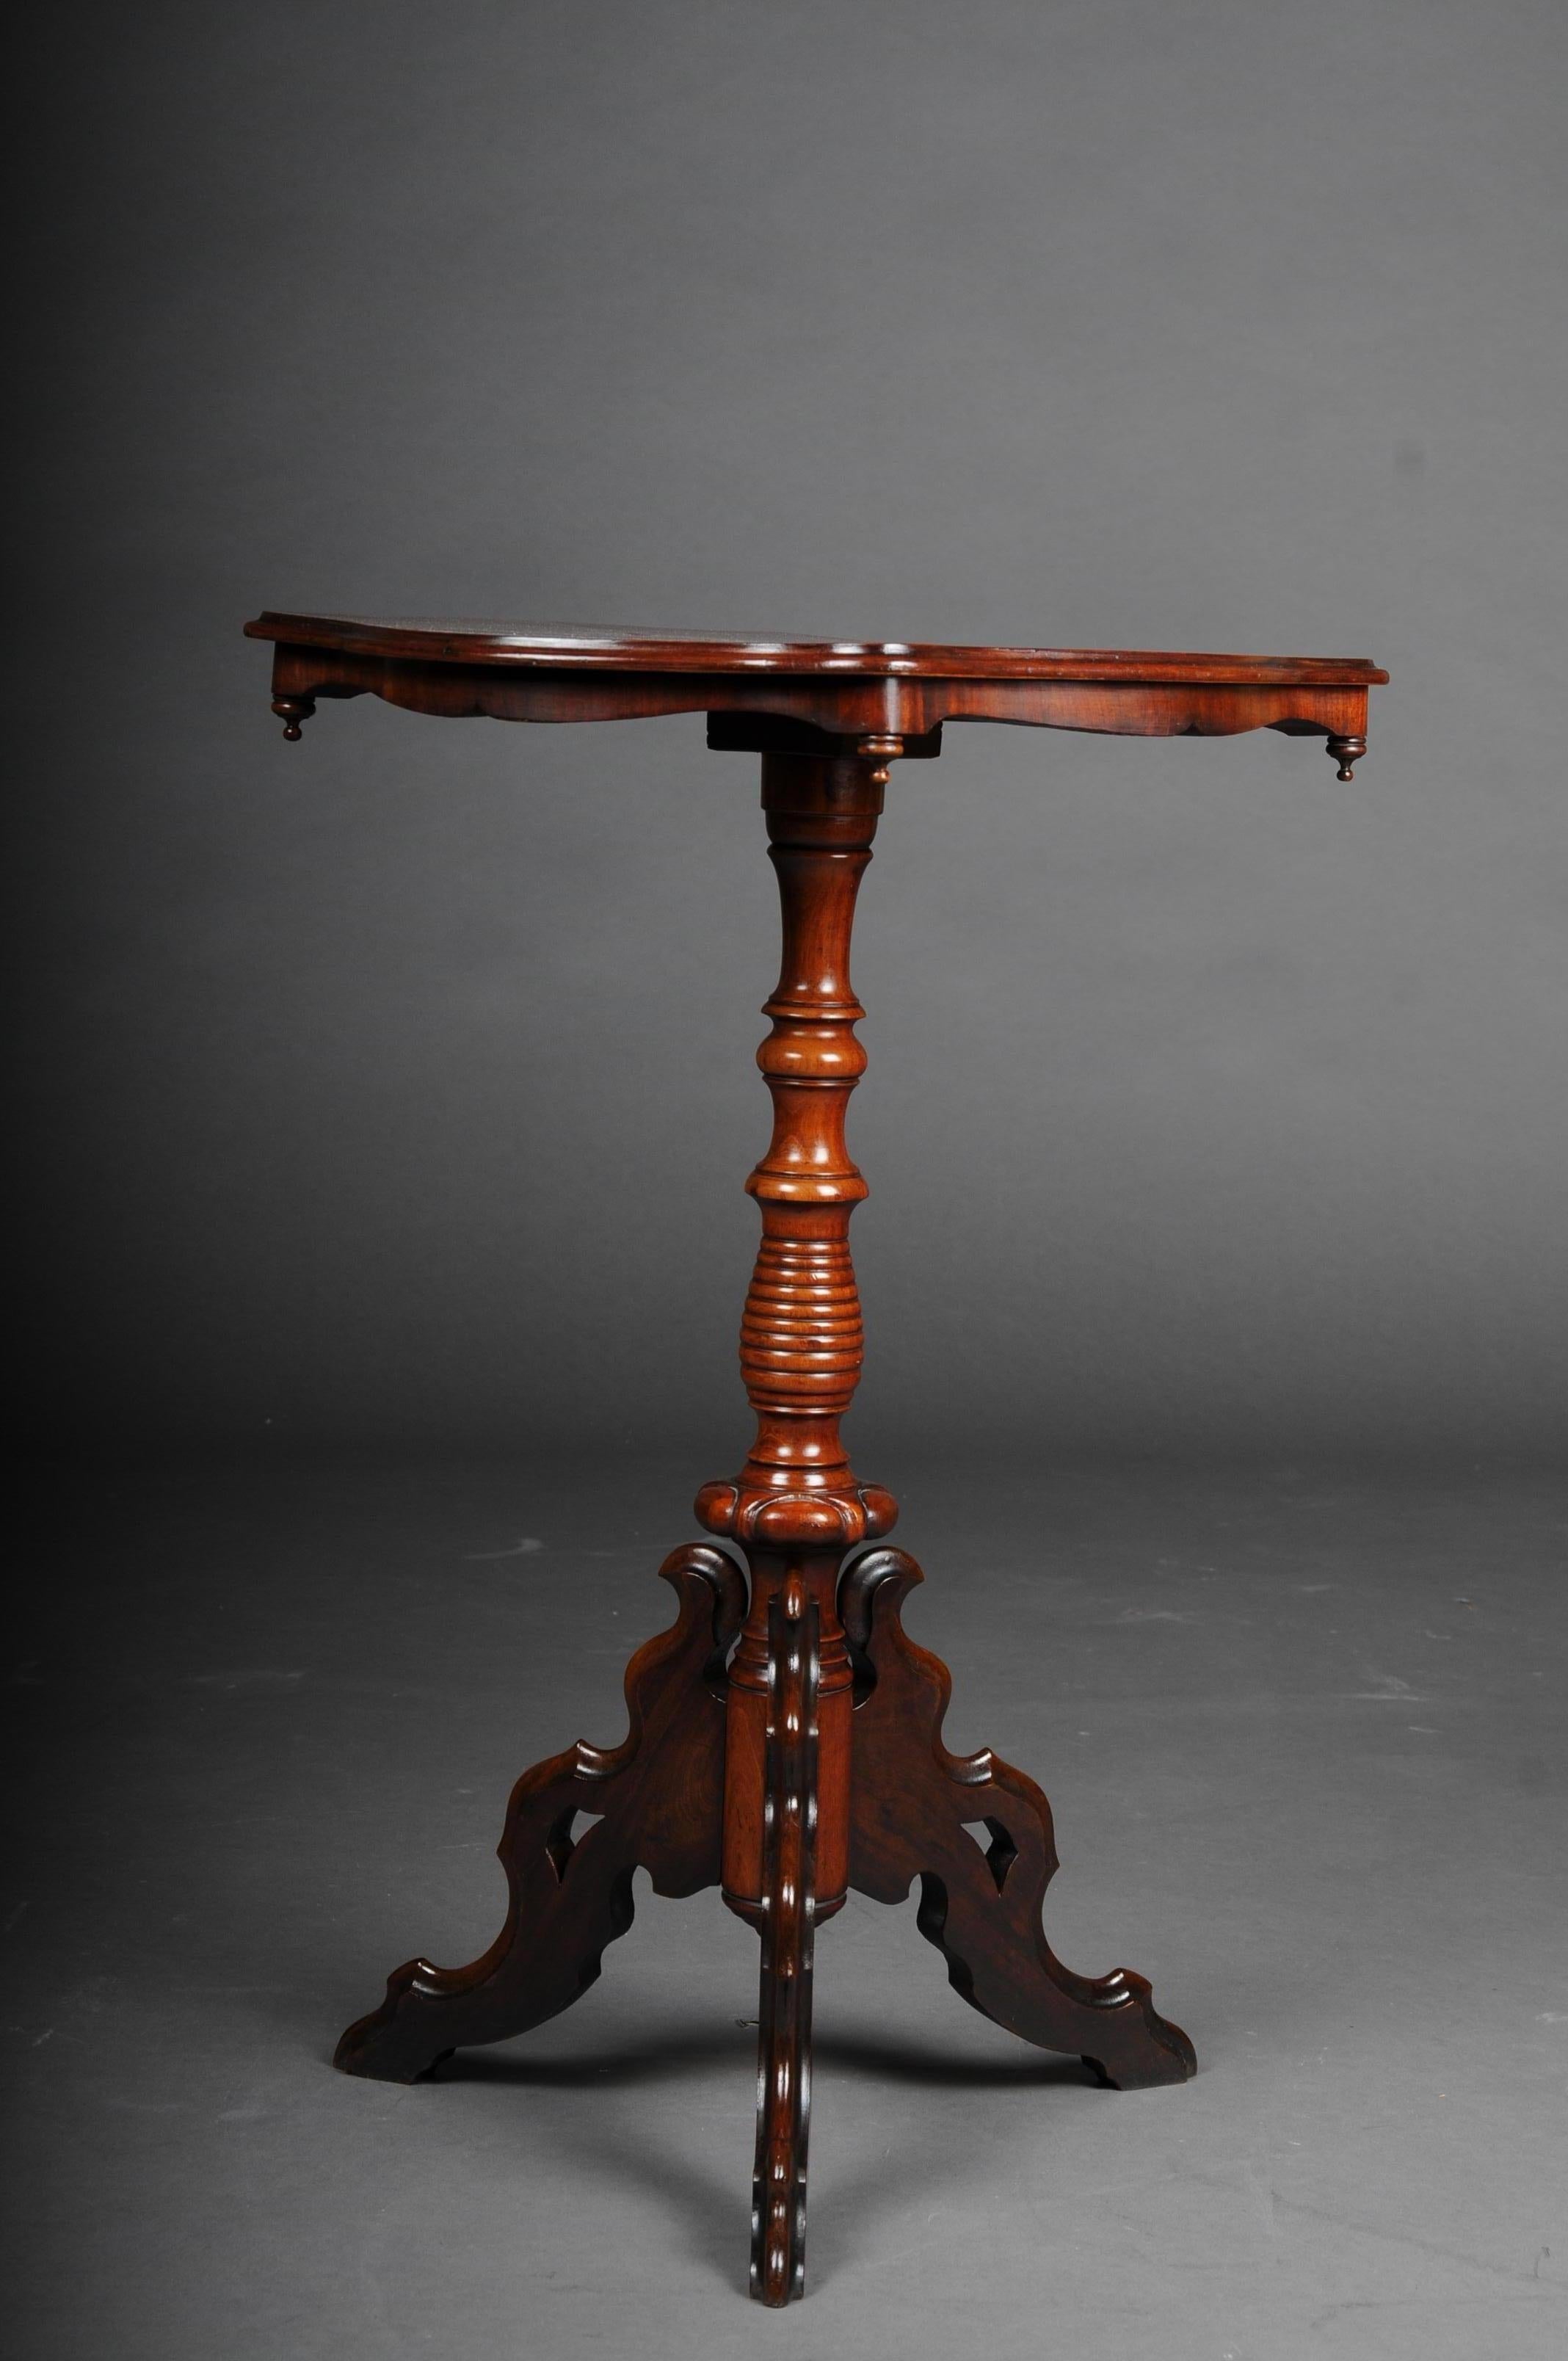 Louis Phillip side table mahogany, around 1860

Solid wood and mahogany veneer. Multi-pass curved cover plate on profiled balustrade shaft ending on three curved feet. Cover plate can be unscrewed.

(G-98).